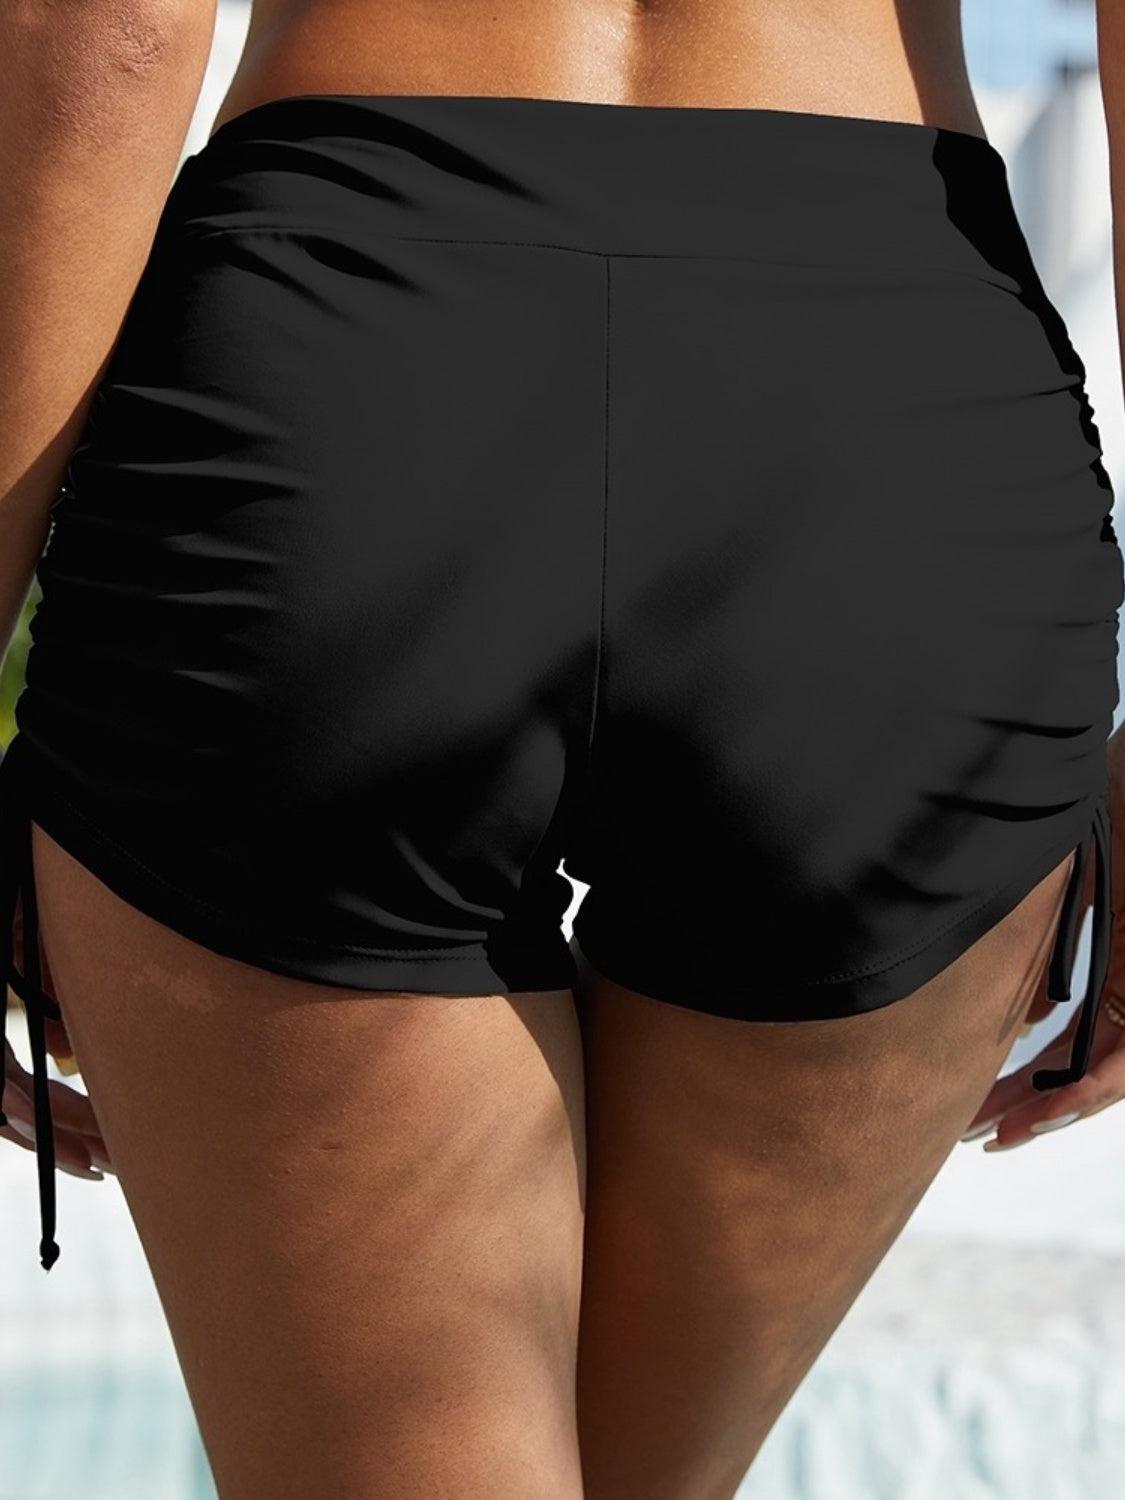 a close up of a woman's butt wearing a black swimsuit